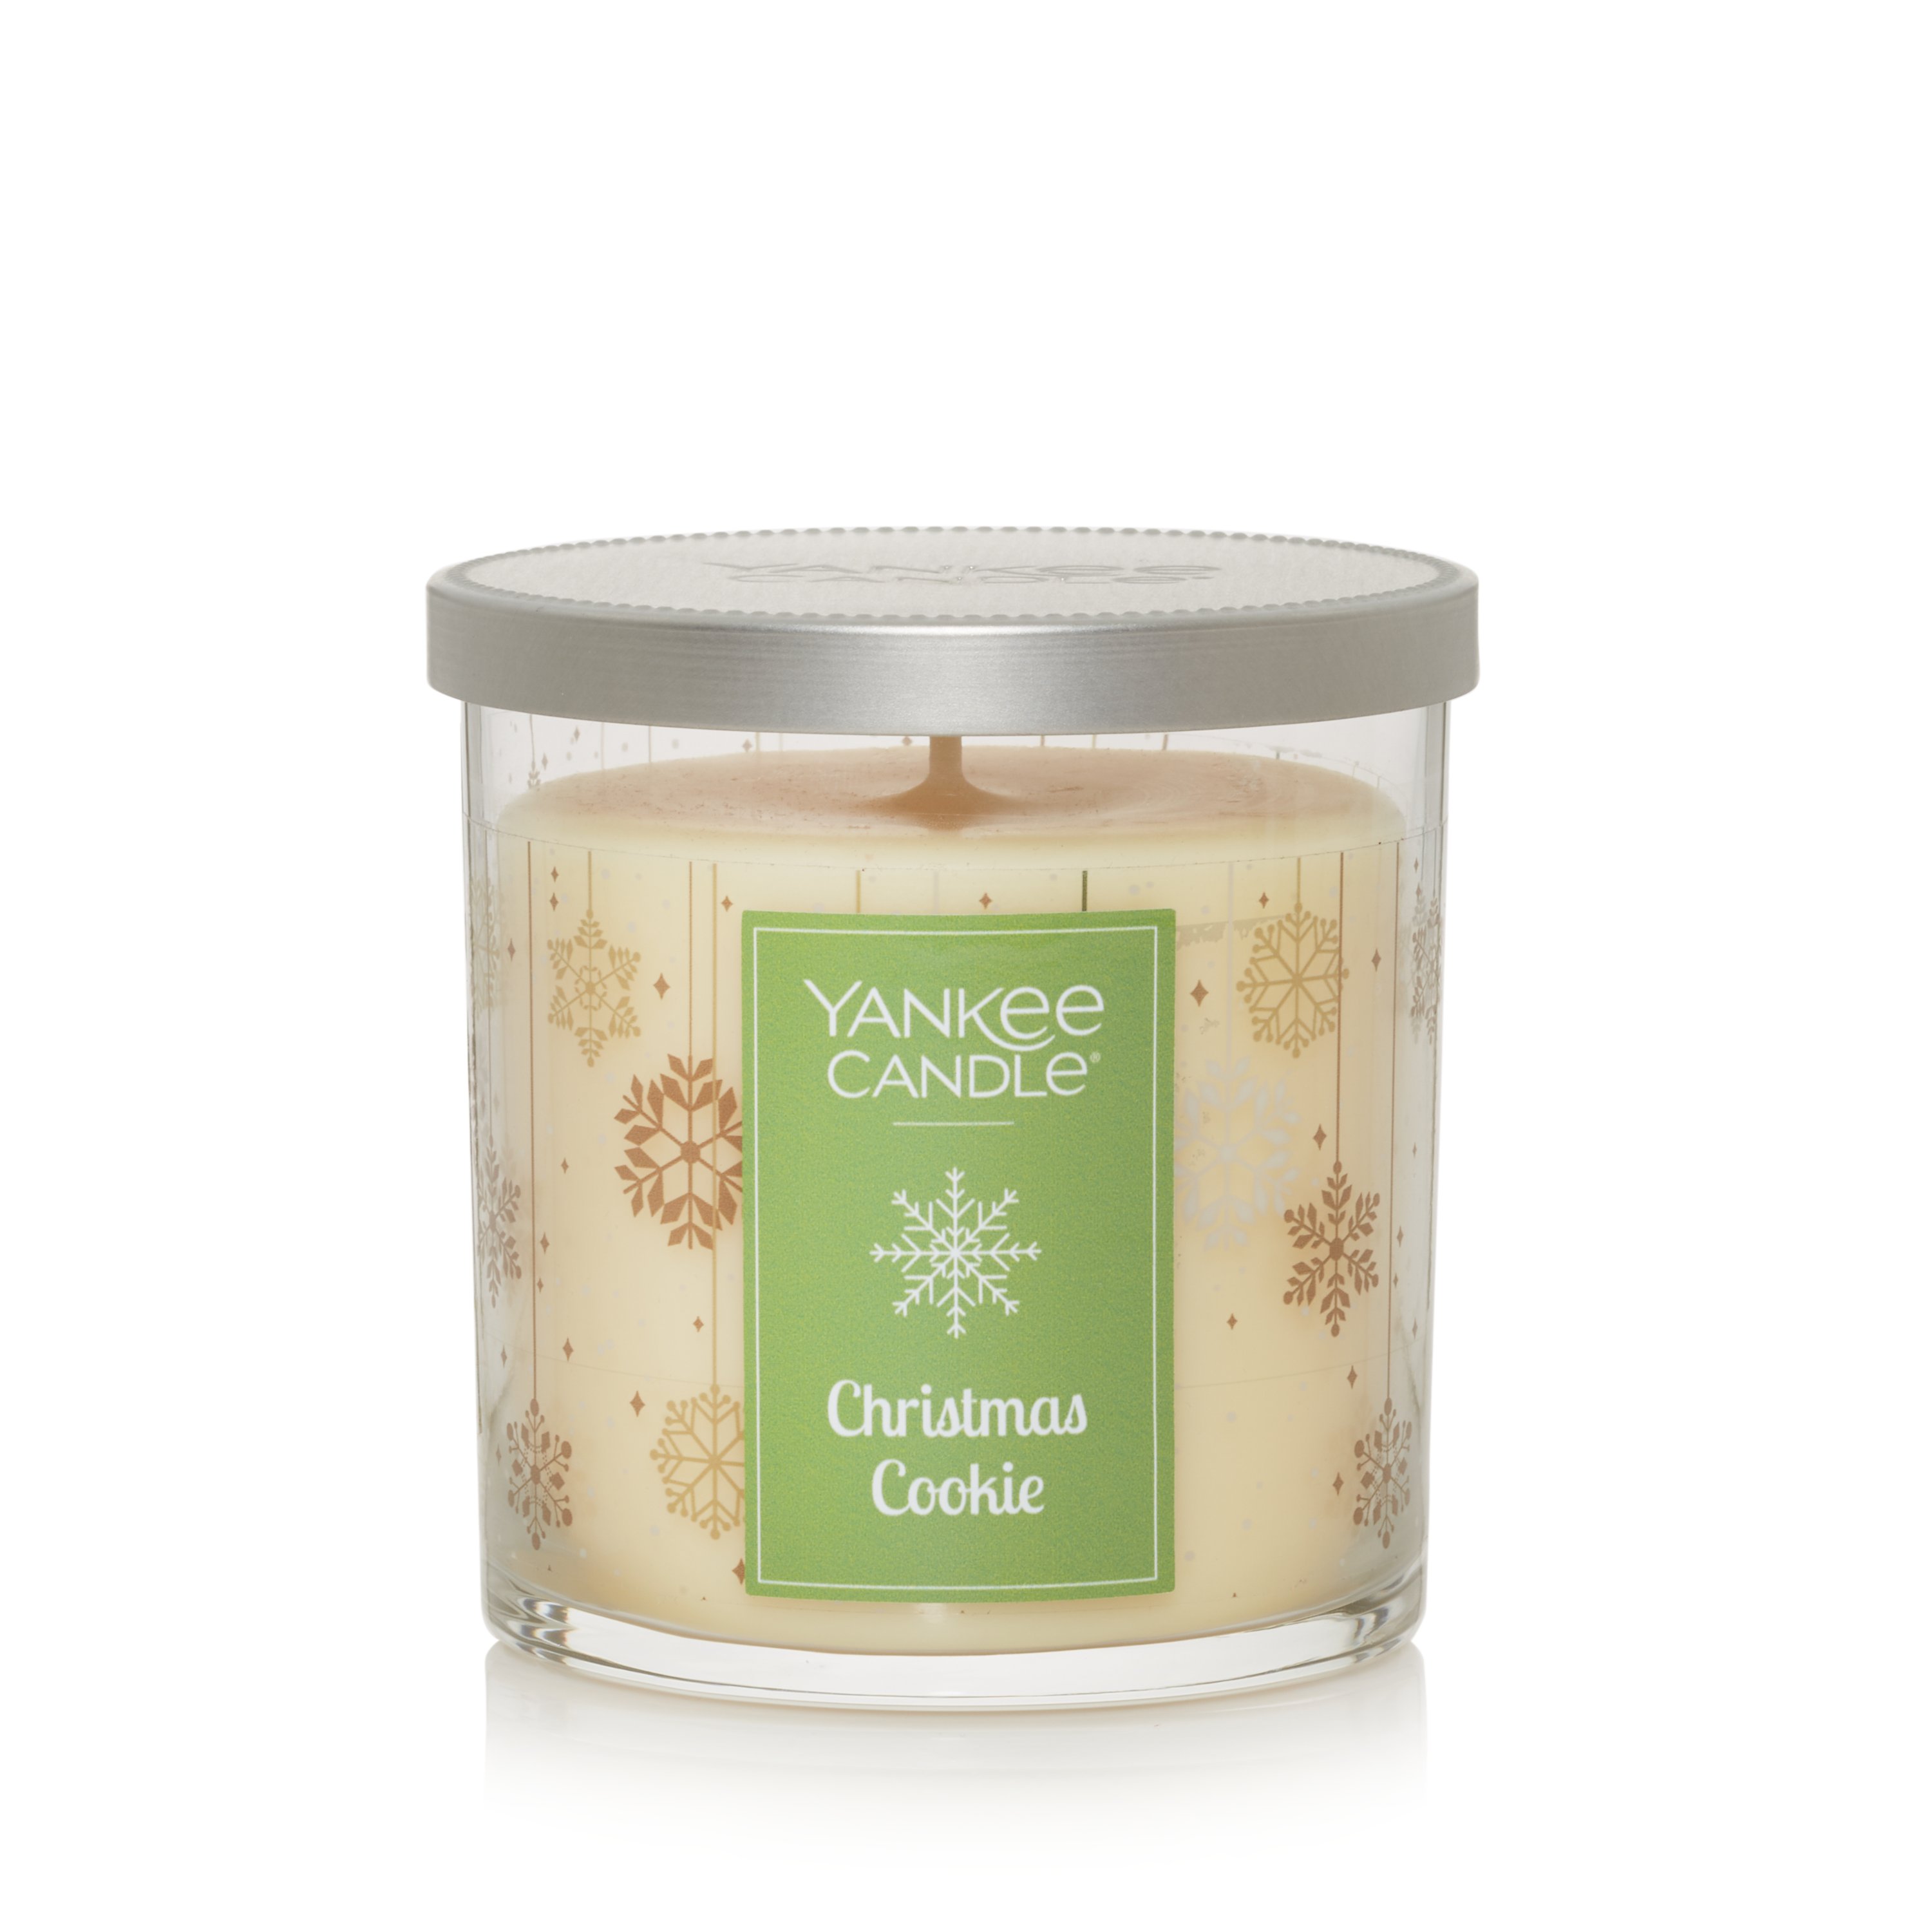 Yankee Candle Christmas Cookie Small Jar Candle